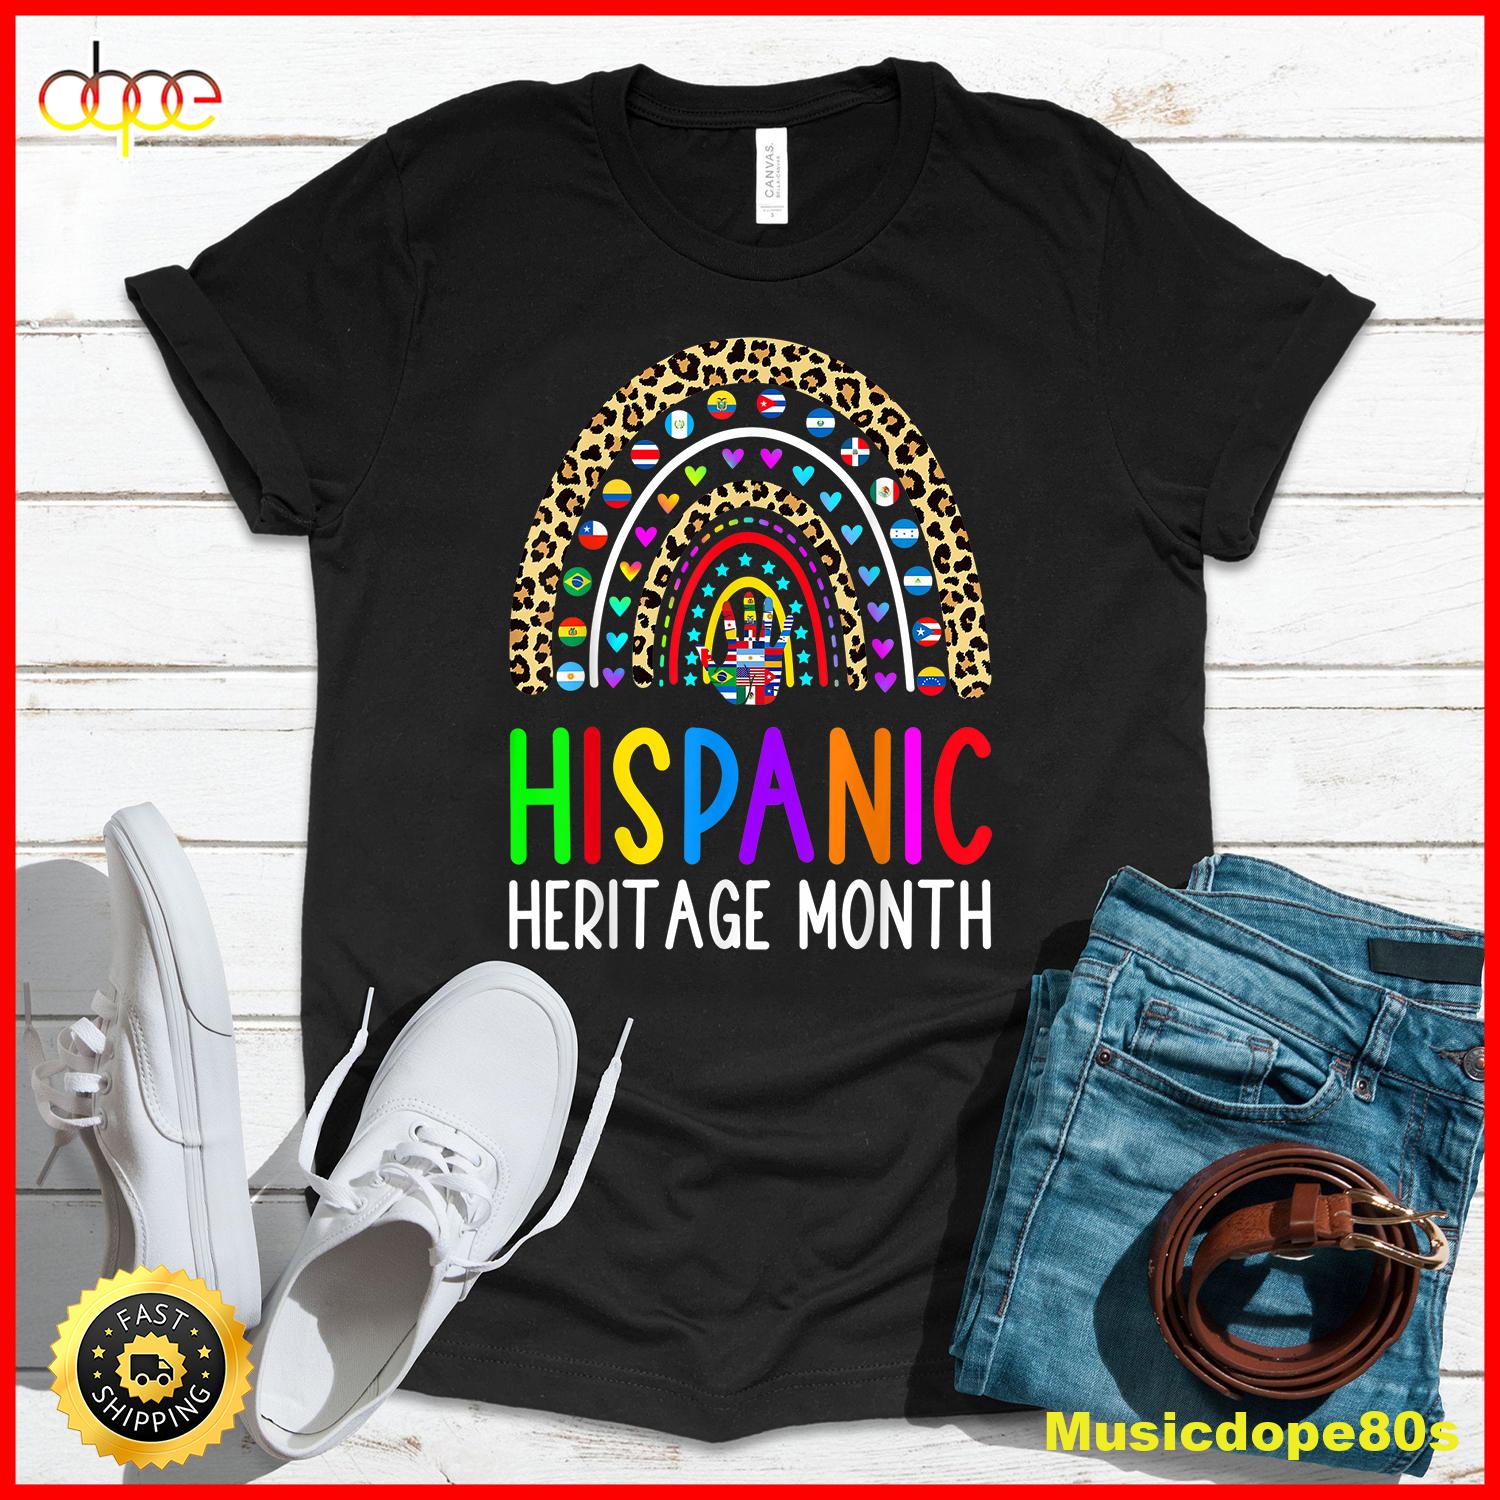 National Hispanic Heritage Month Rainbow All Countries Flags T Shirt